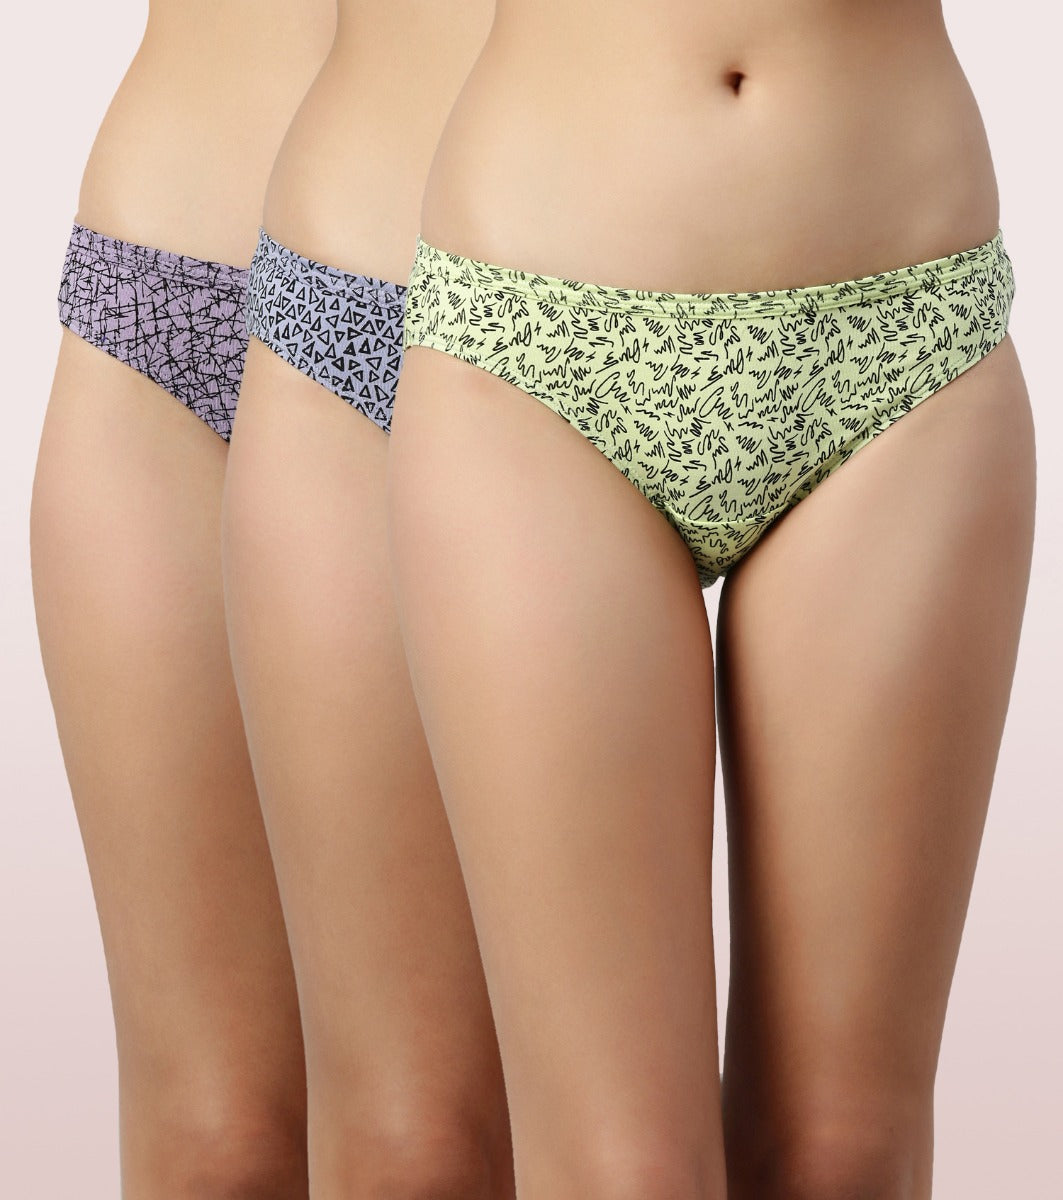 Enamor Everyday Panty for Women - Antimicrobial Briefs for Women